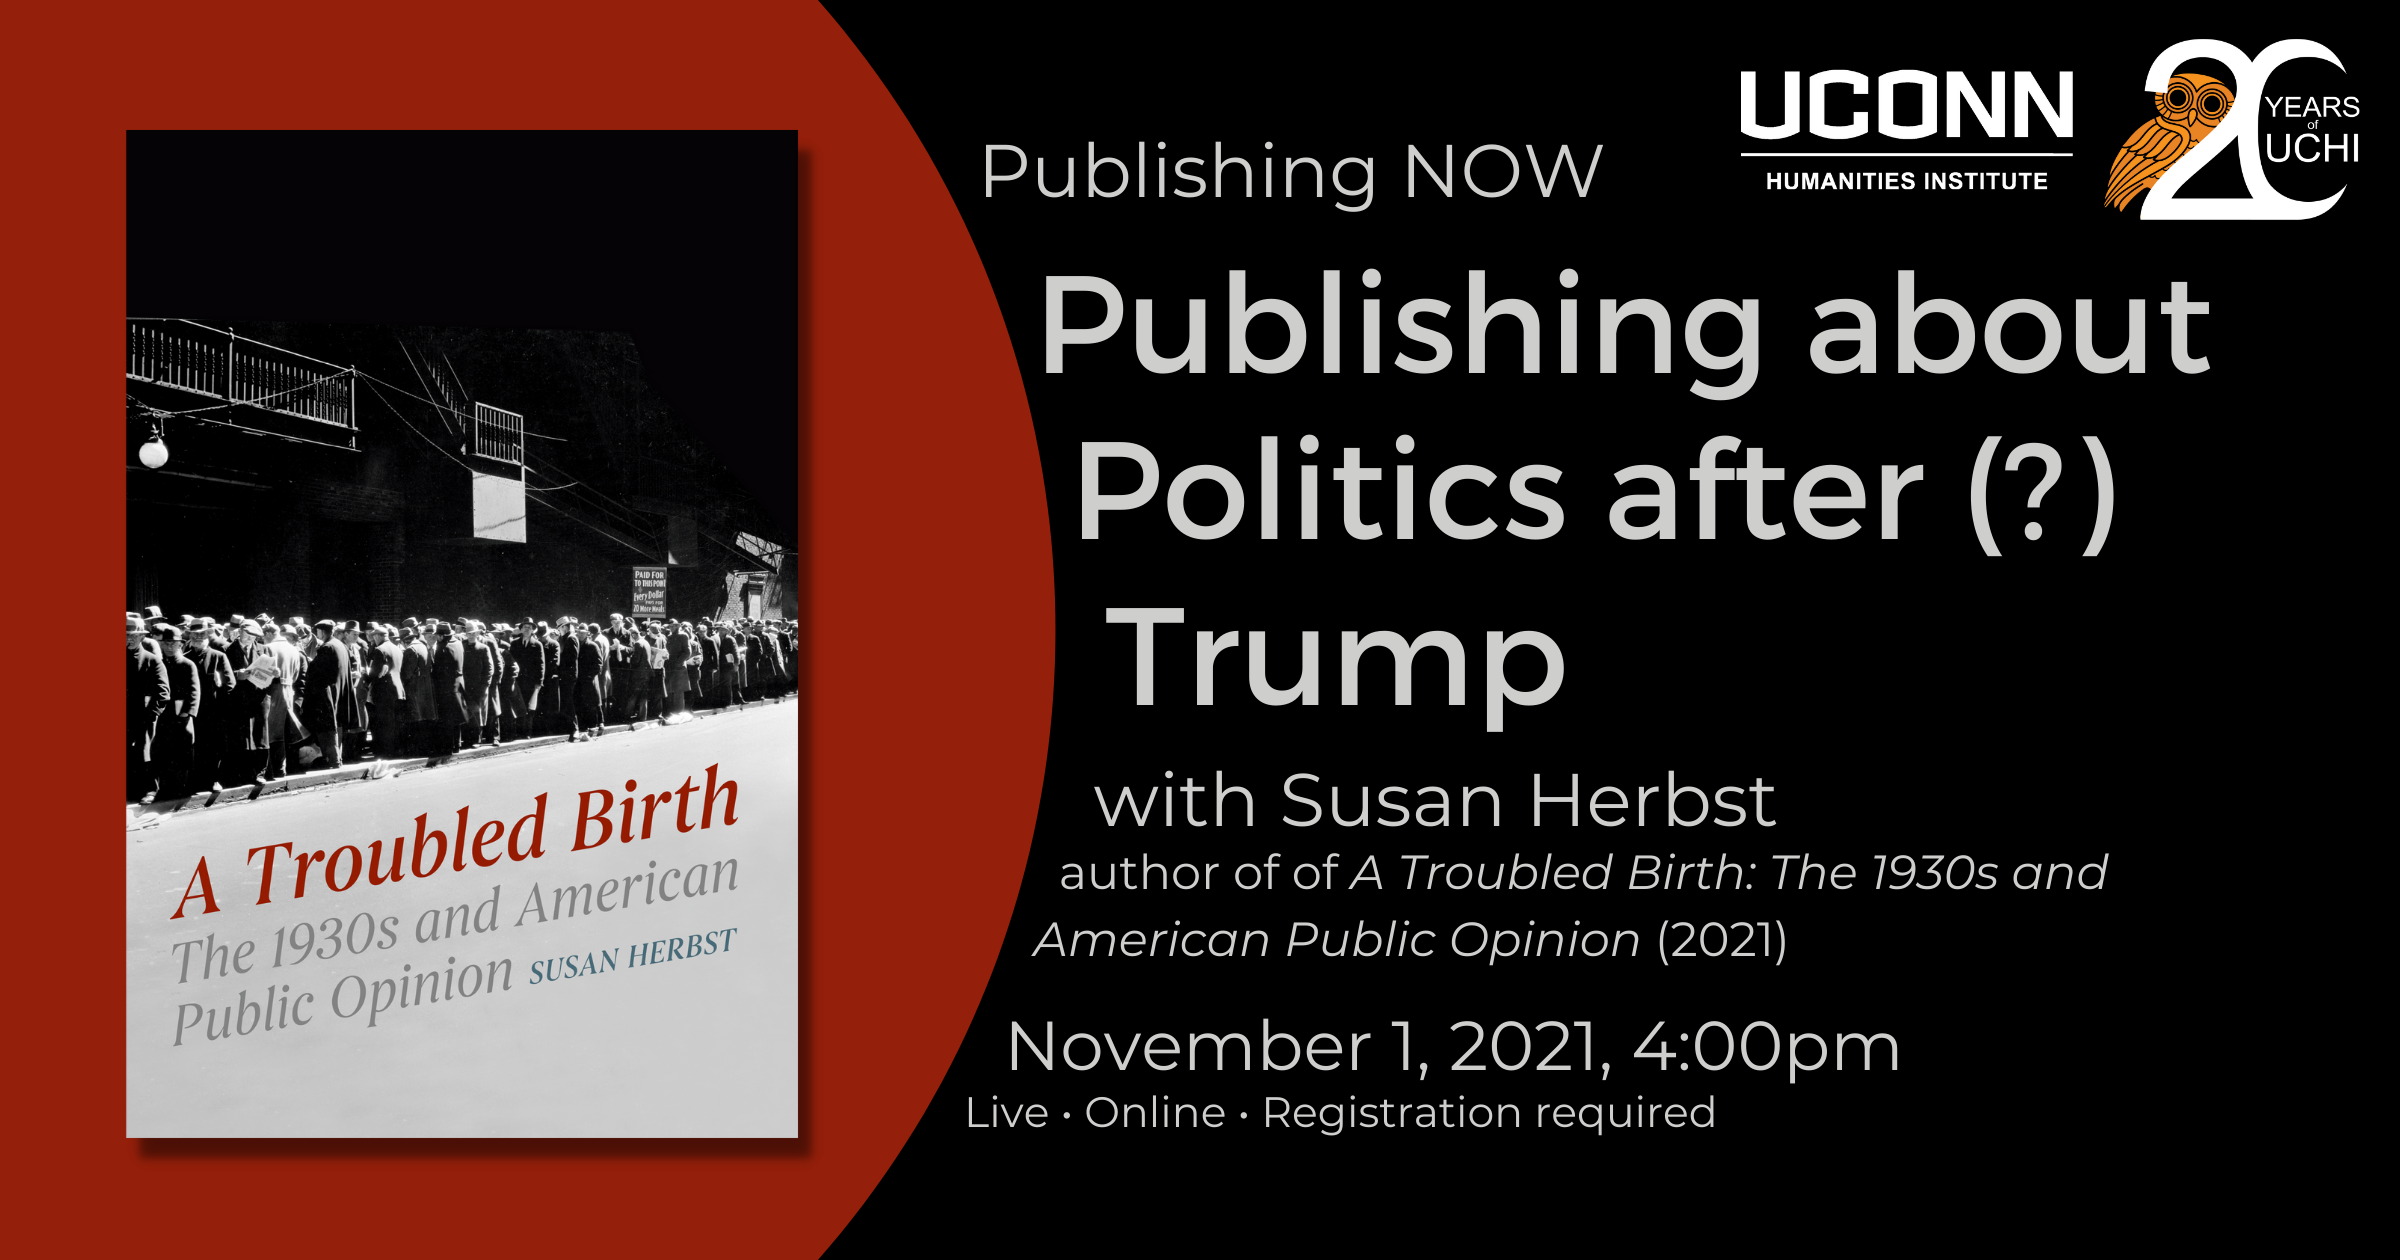 Publishing NOW: Publishing about politics after (?) Trump. Susan Herbst, author of A Troubled Birth: The 1930s and American Public Opinion. November 1, 2021, 4:00pm. Live Online. Registration required.